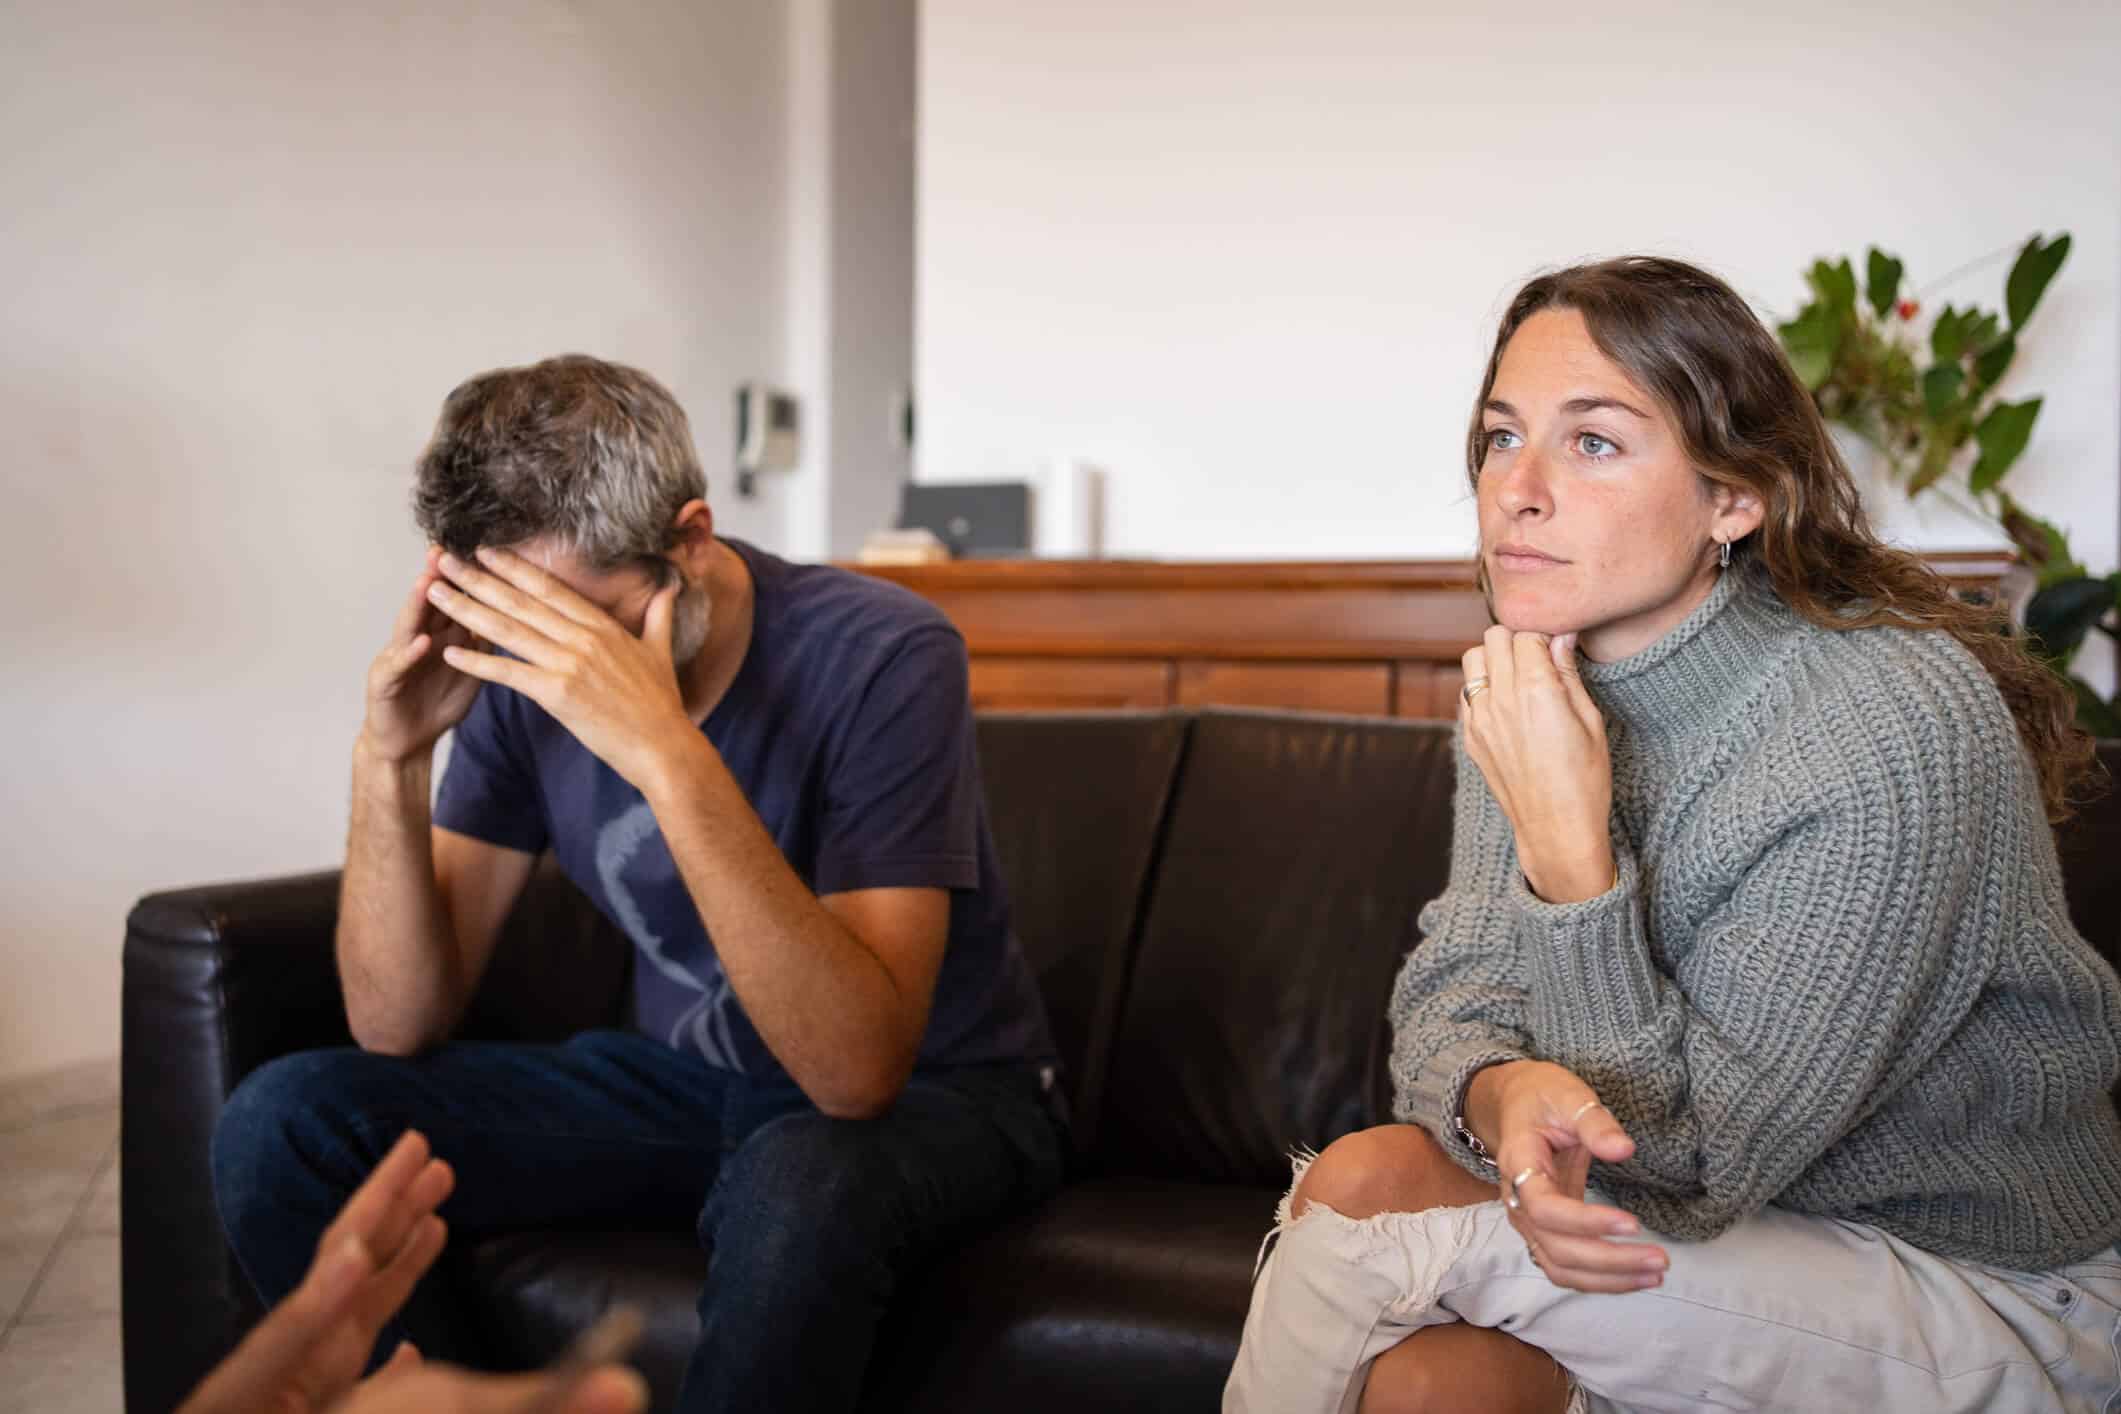 A sad looking man with hands on his head and serious looking lady both sitting on a couch across a therapist during an in person visit